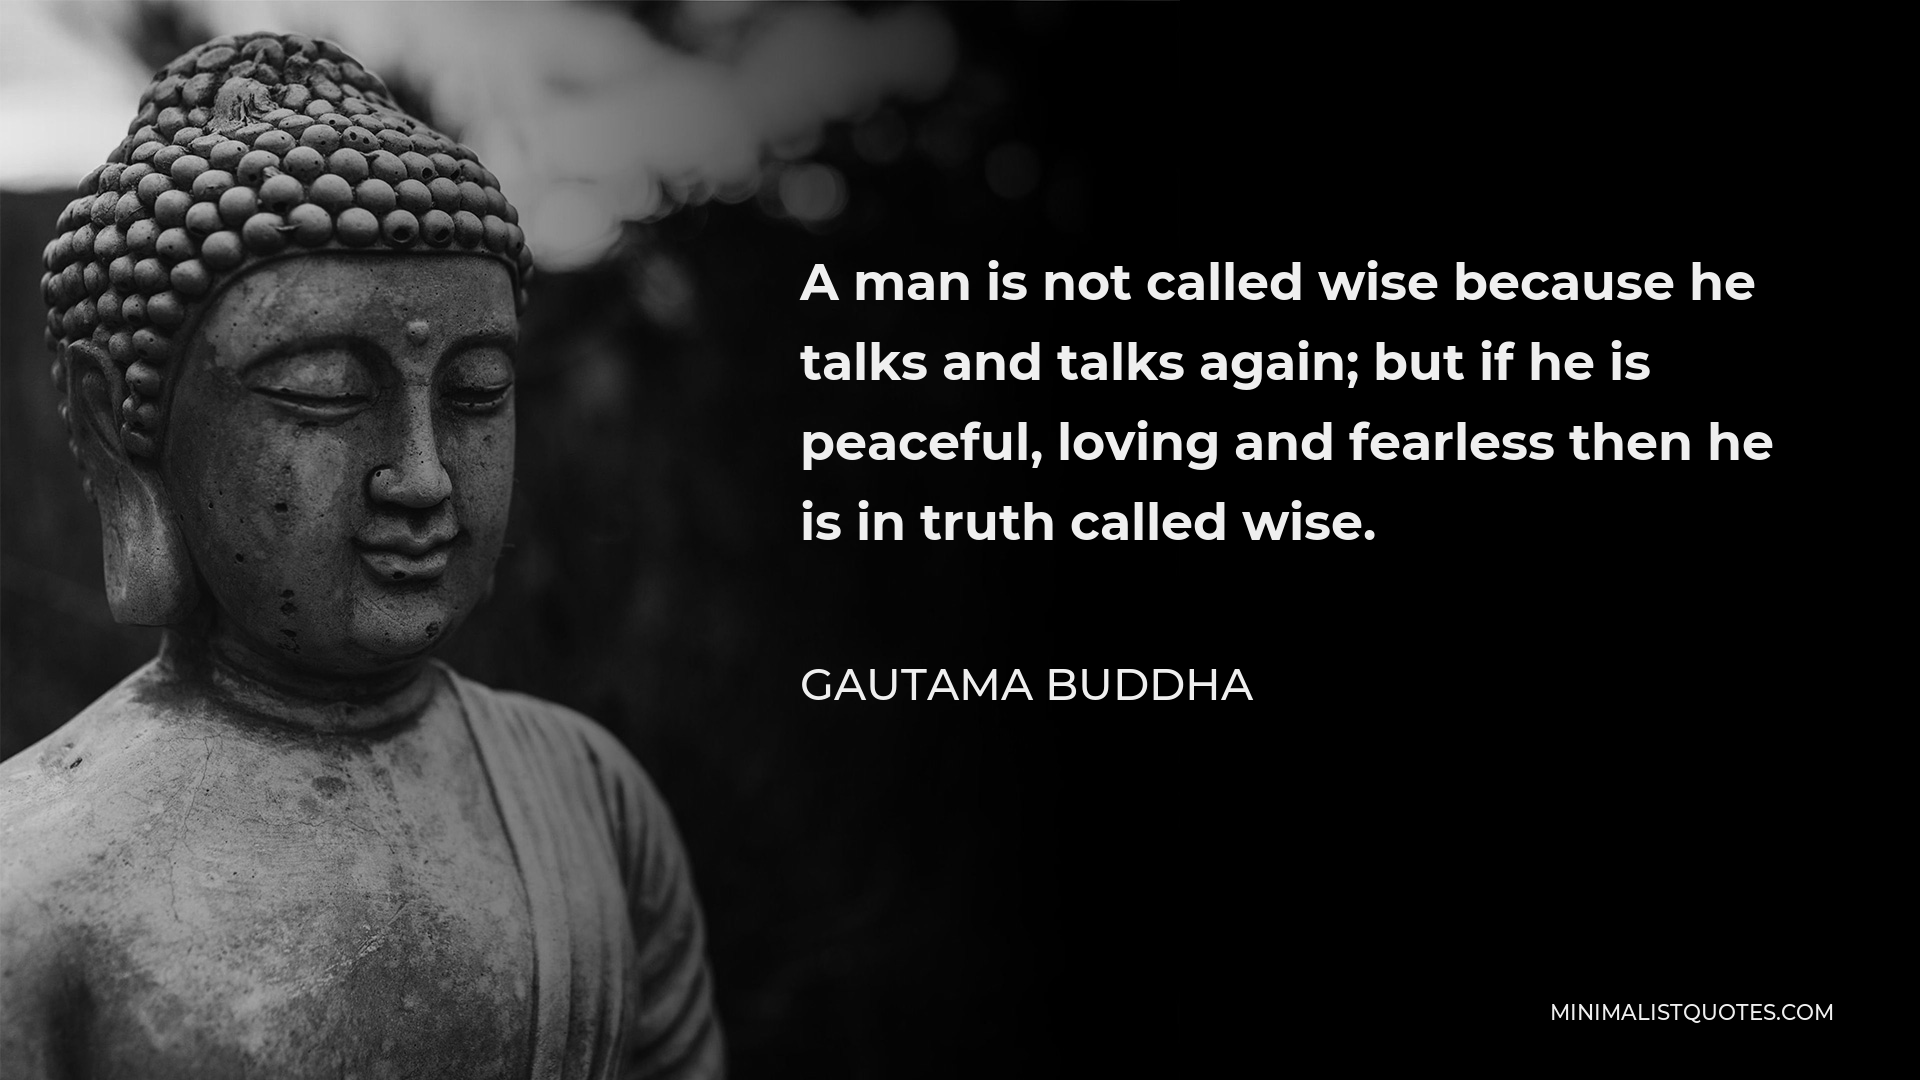 Gautama Buddha Quote - A man is not called wise because he talks and talks again; but if he is peaceful, loving and fearless then he is in truth called wise.